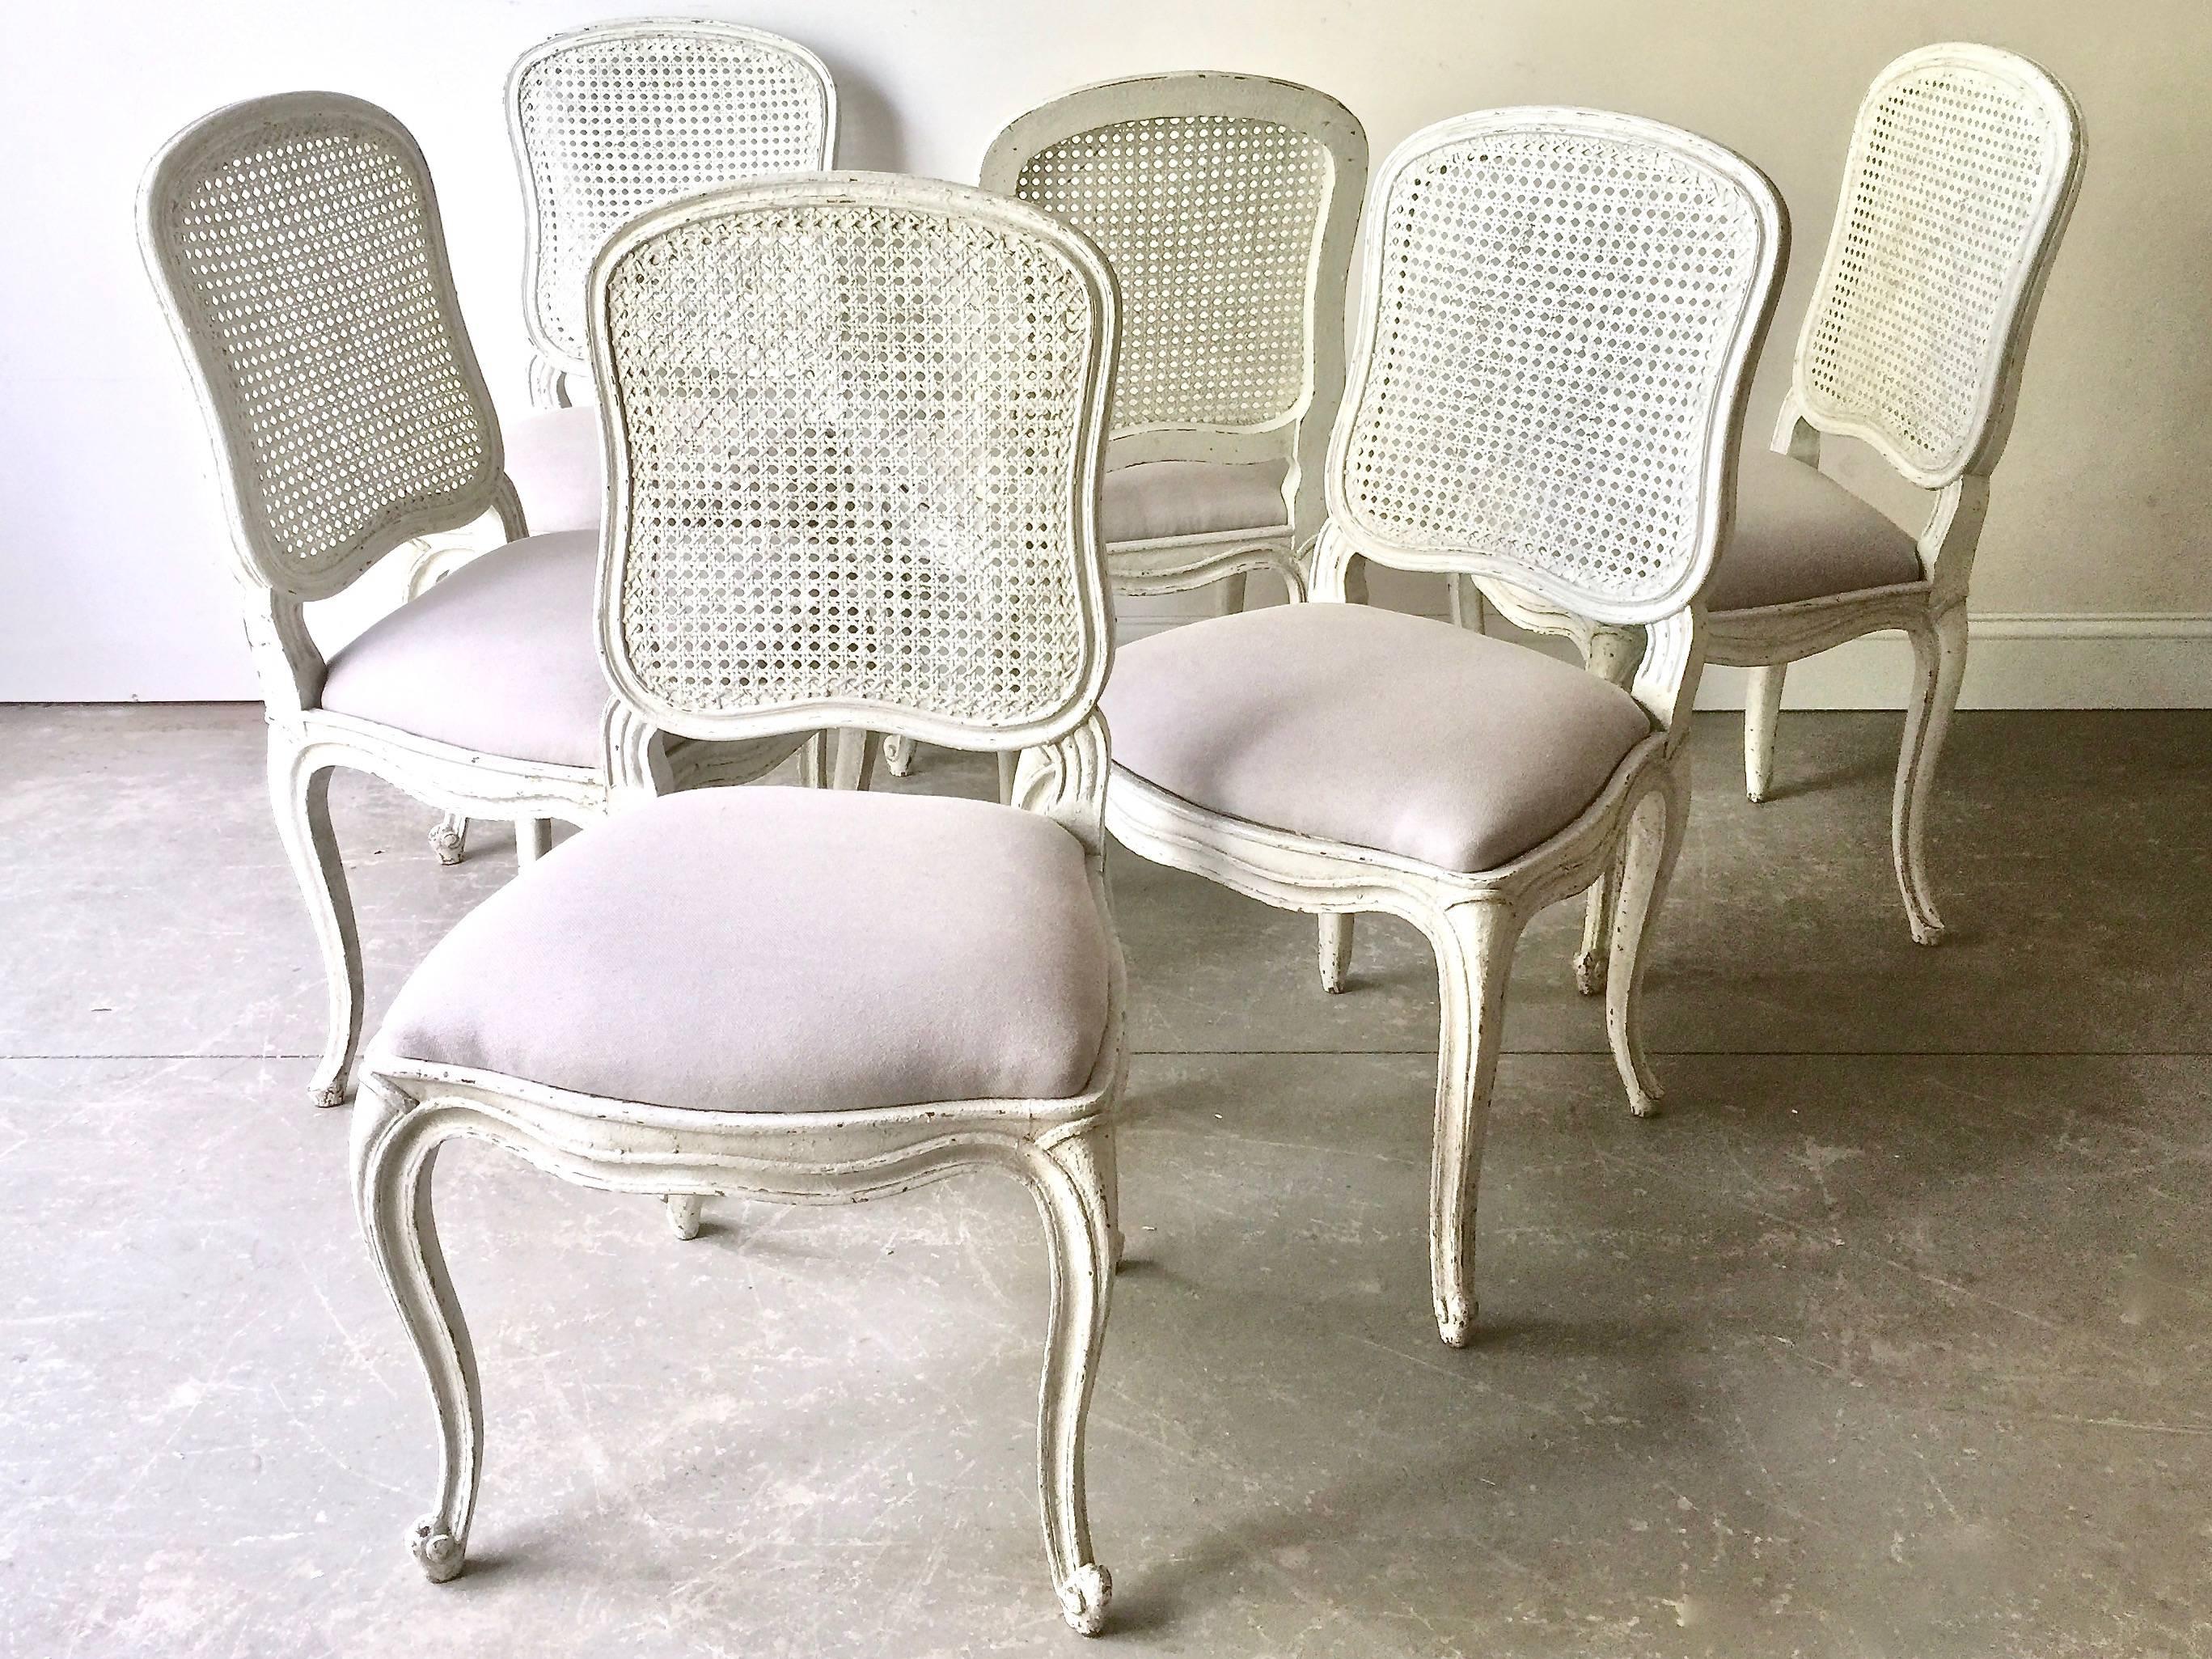 Set of six French, 19th century dining chairs Louis XV style with flat back called “la Reine” is caned and scalloped frieze carved and raised on cabriole legs. Newly upholstered in light gray linen. Seats are removable for easy re-uphostery. Very